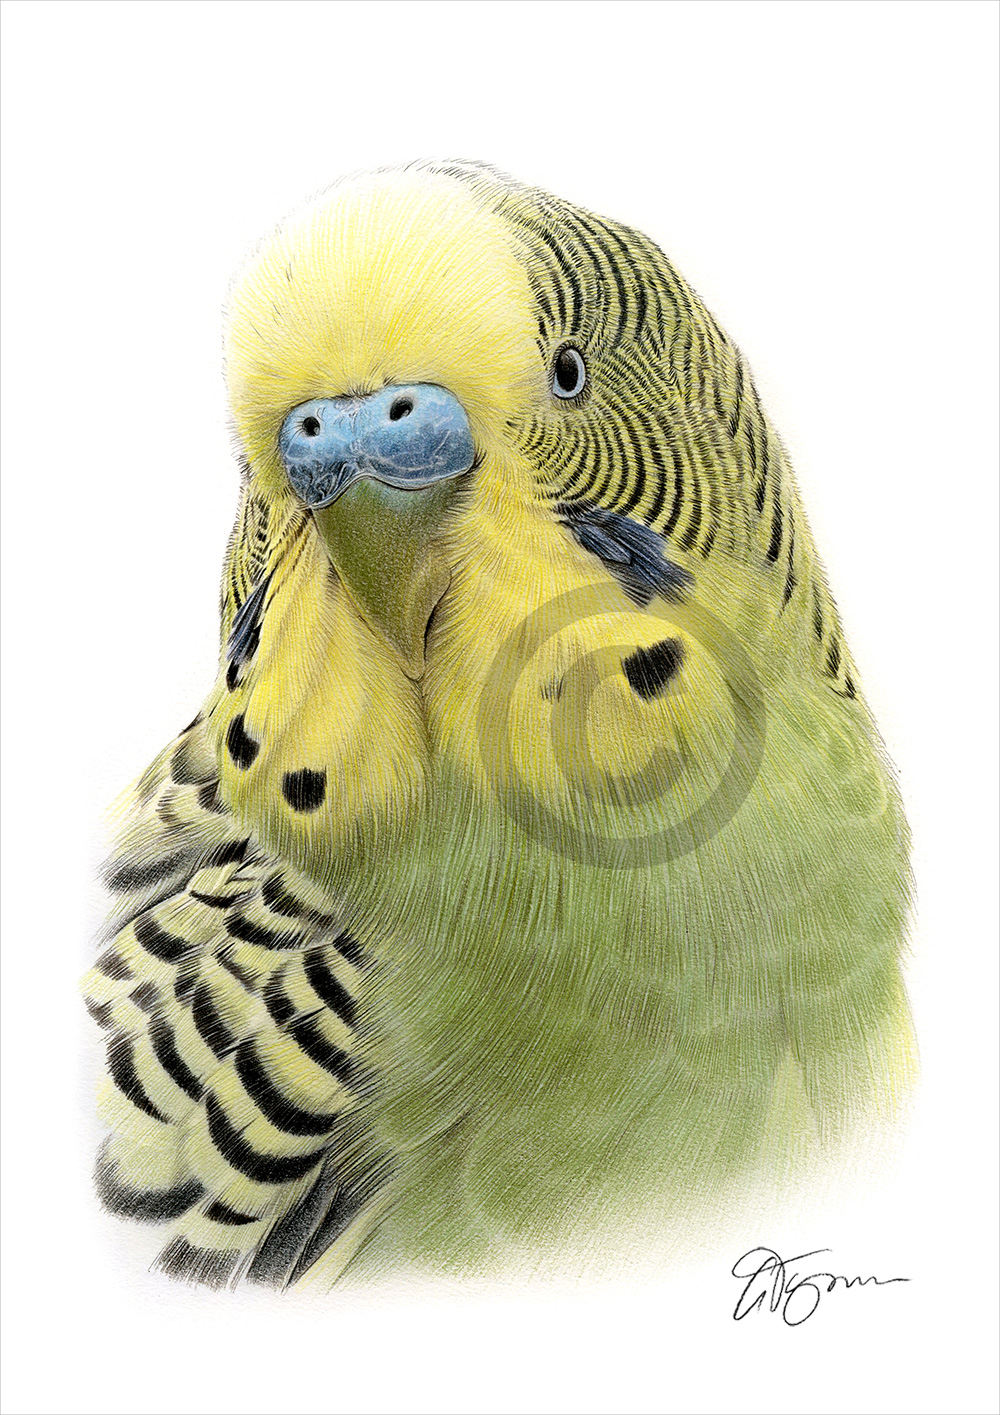 Colour pencil drawing of a budgie by artist Gary Tymon